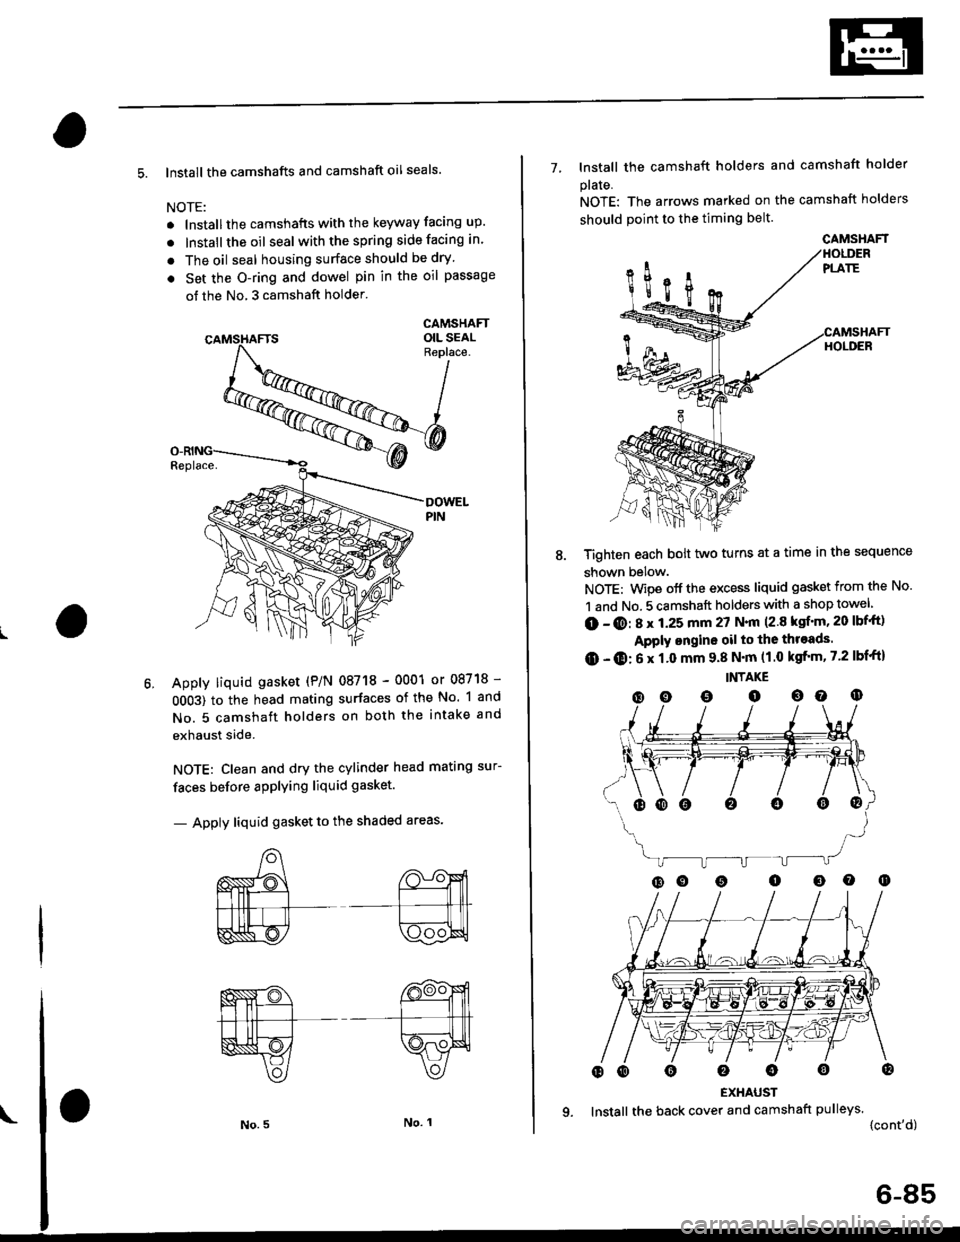 HONDA CIVIC 2000 6.G Owners Guide 5. lnstall the camshafts and camshaft oil seals.
NOTE:
. lnstallthe camshafts with the keyway facing up.
. lnstall the oil seal withthespring side facing in.
. The oil seal housing surface should be d